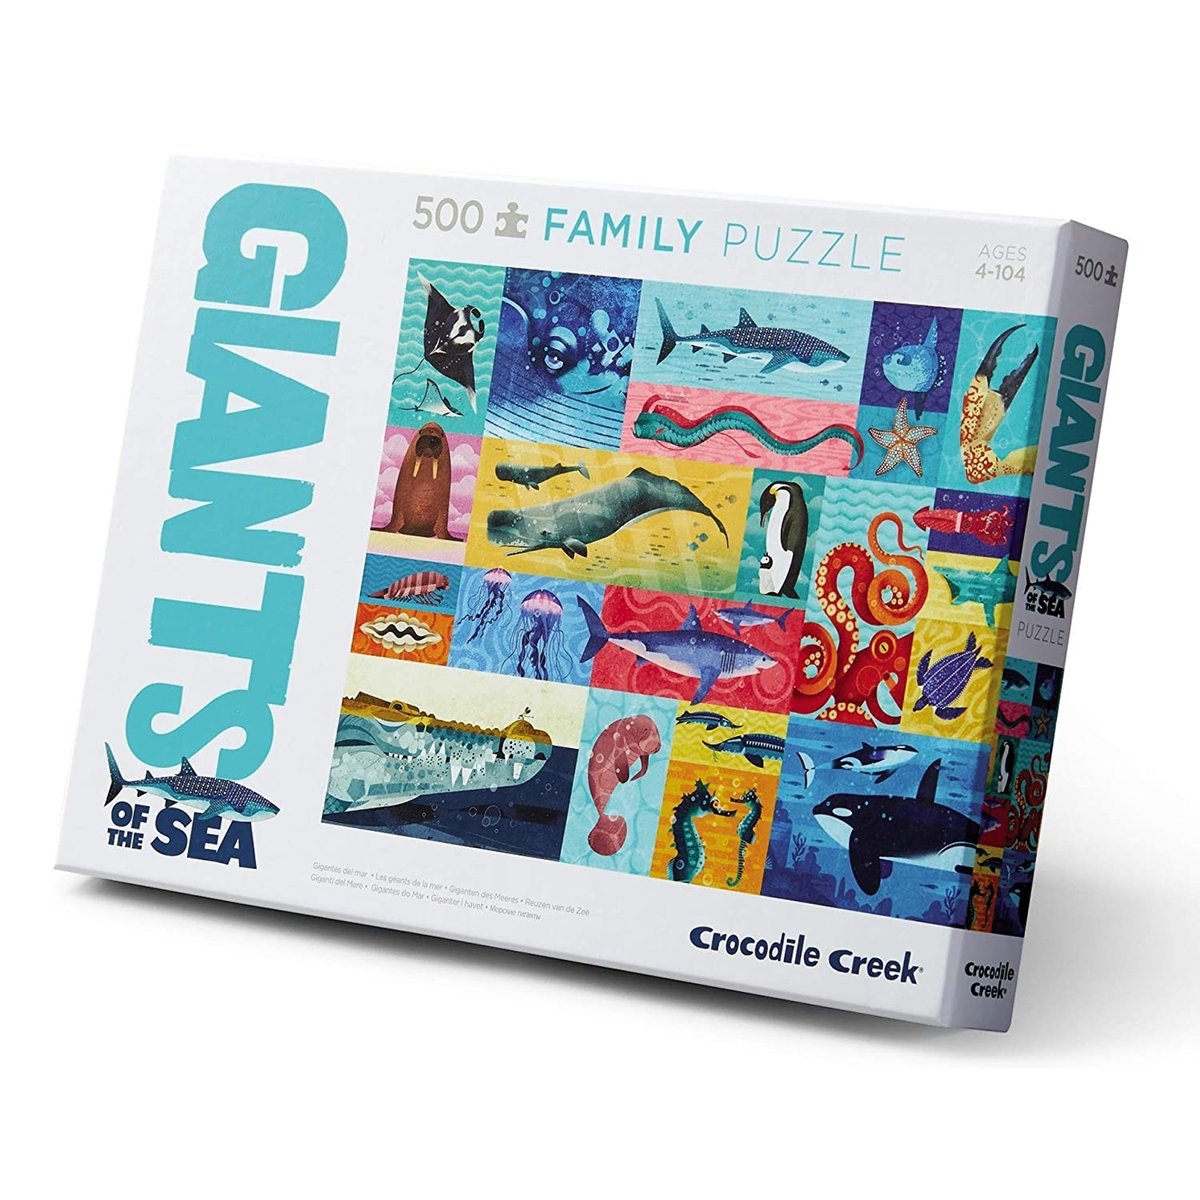 Giants of the Sea - 500pc Puzzle Cover